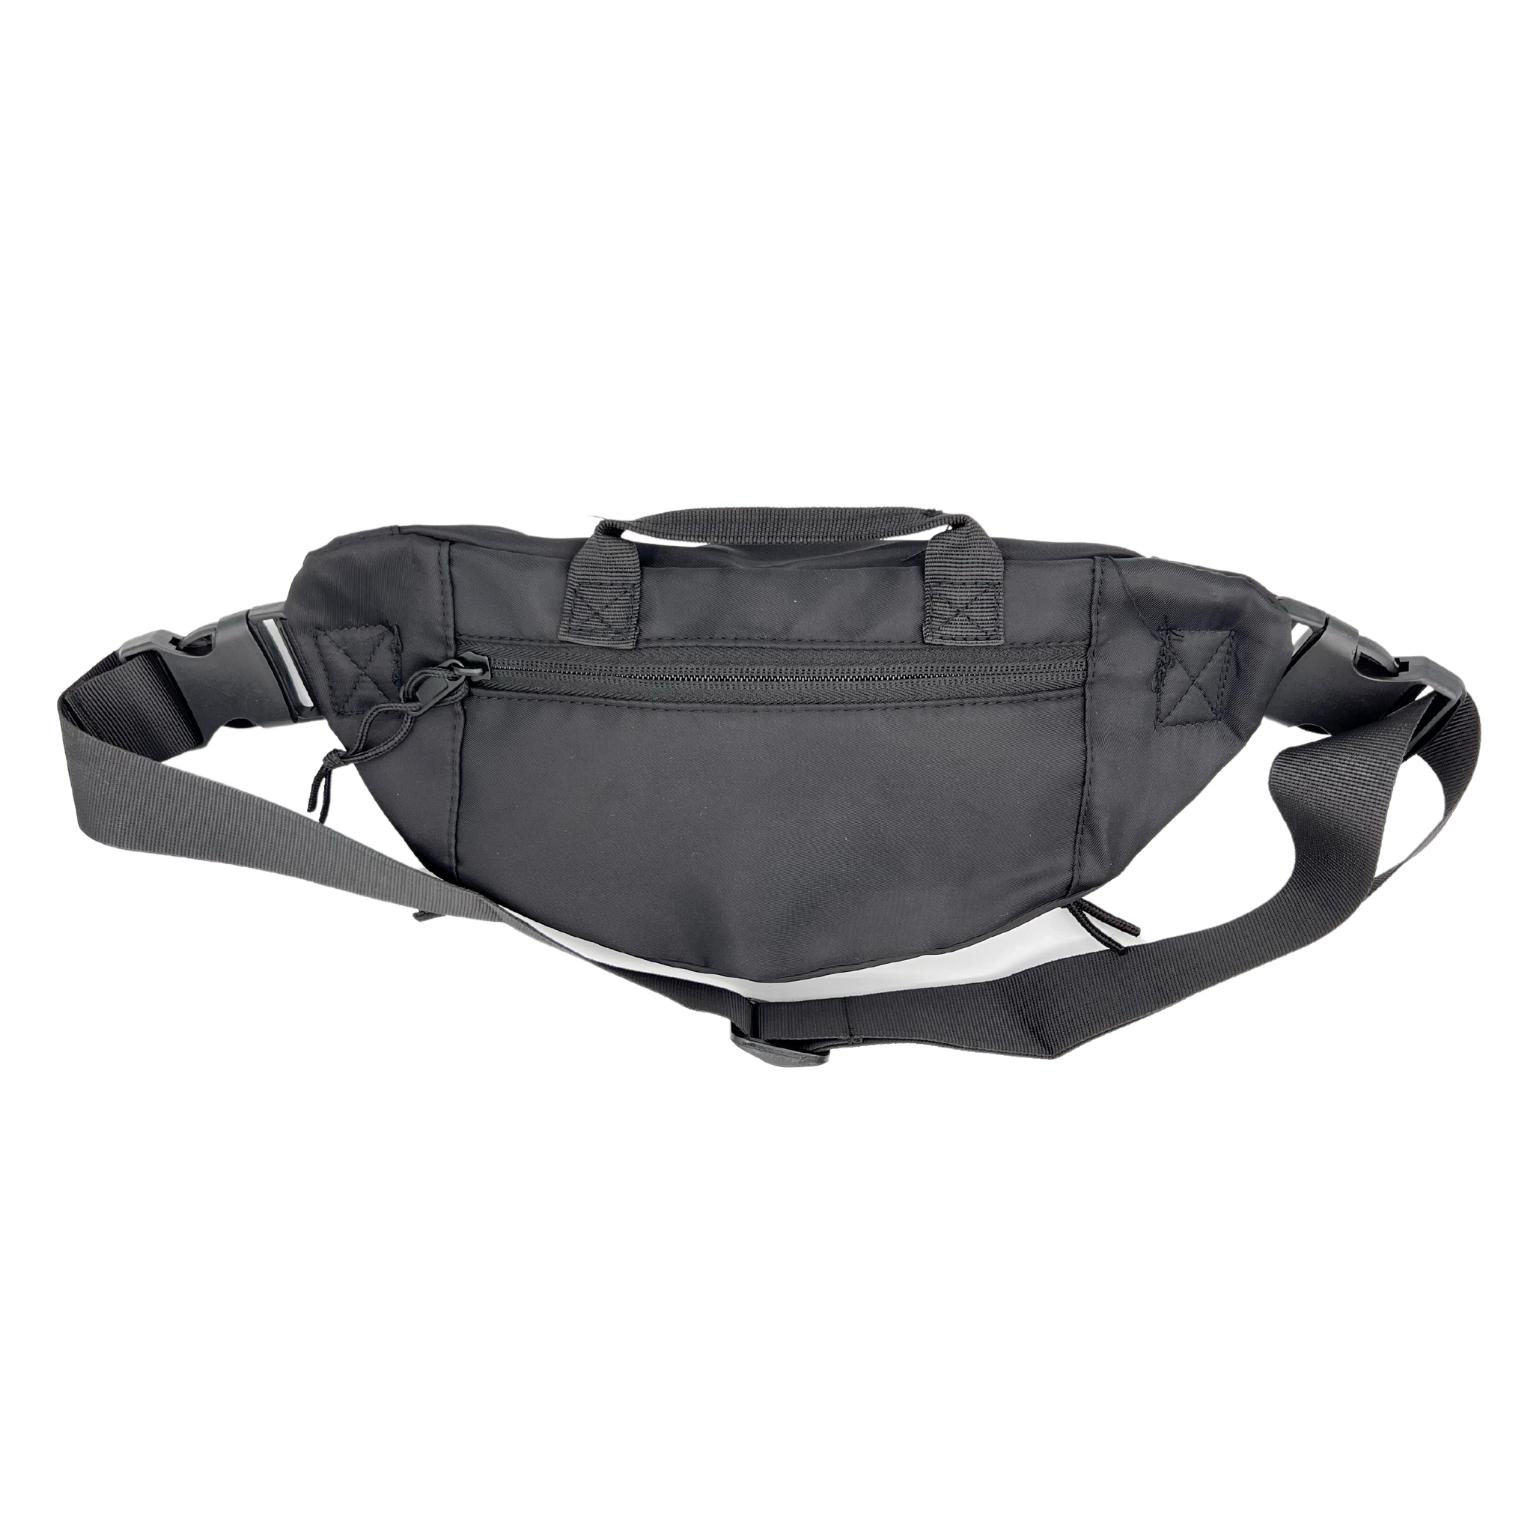 FlexDoctor/PRS Cross-Chest or FannyPack Bag - ARPwave